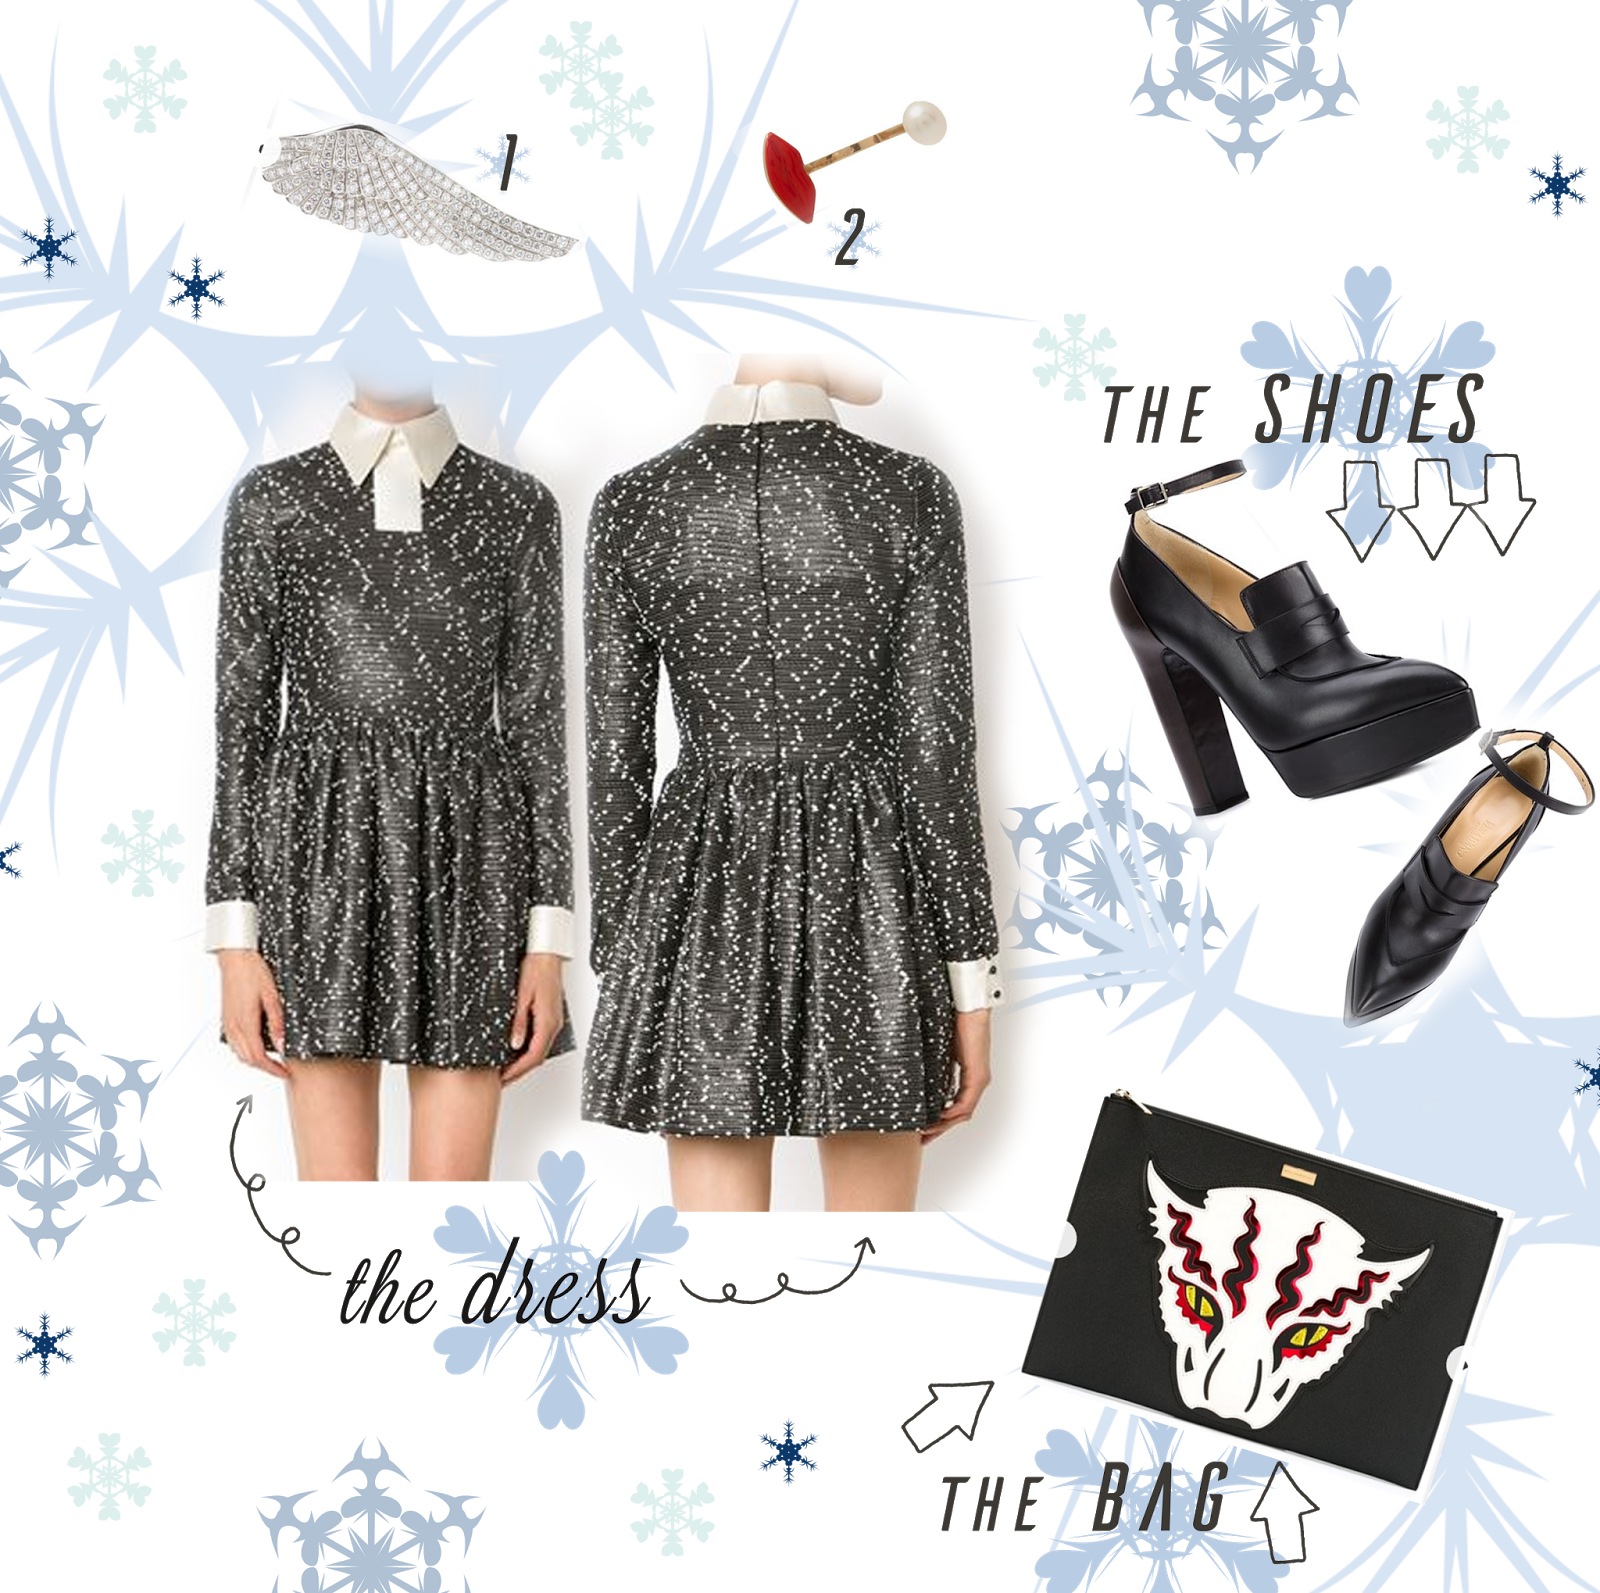 PERFECT PARTY LOOK holiday season farfetch designer outfit